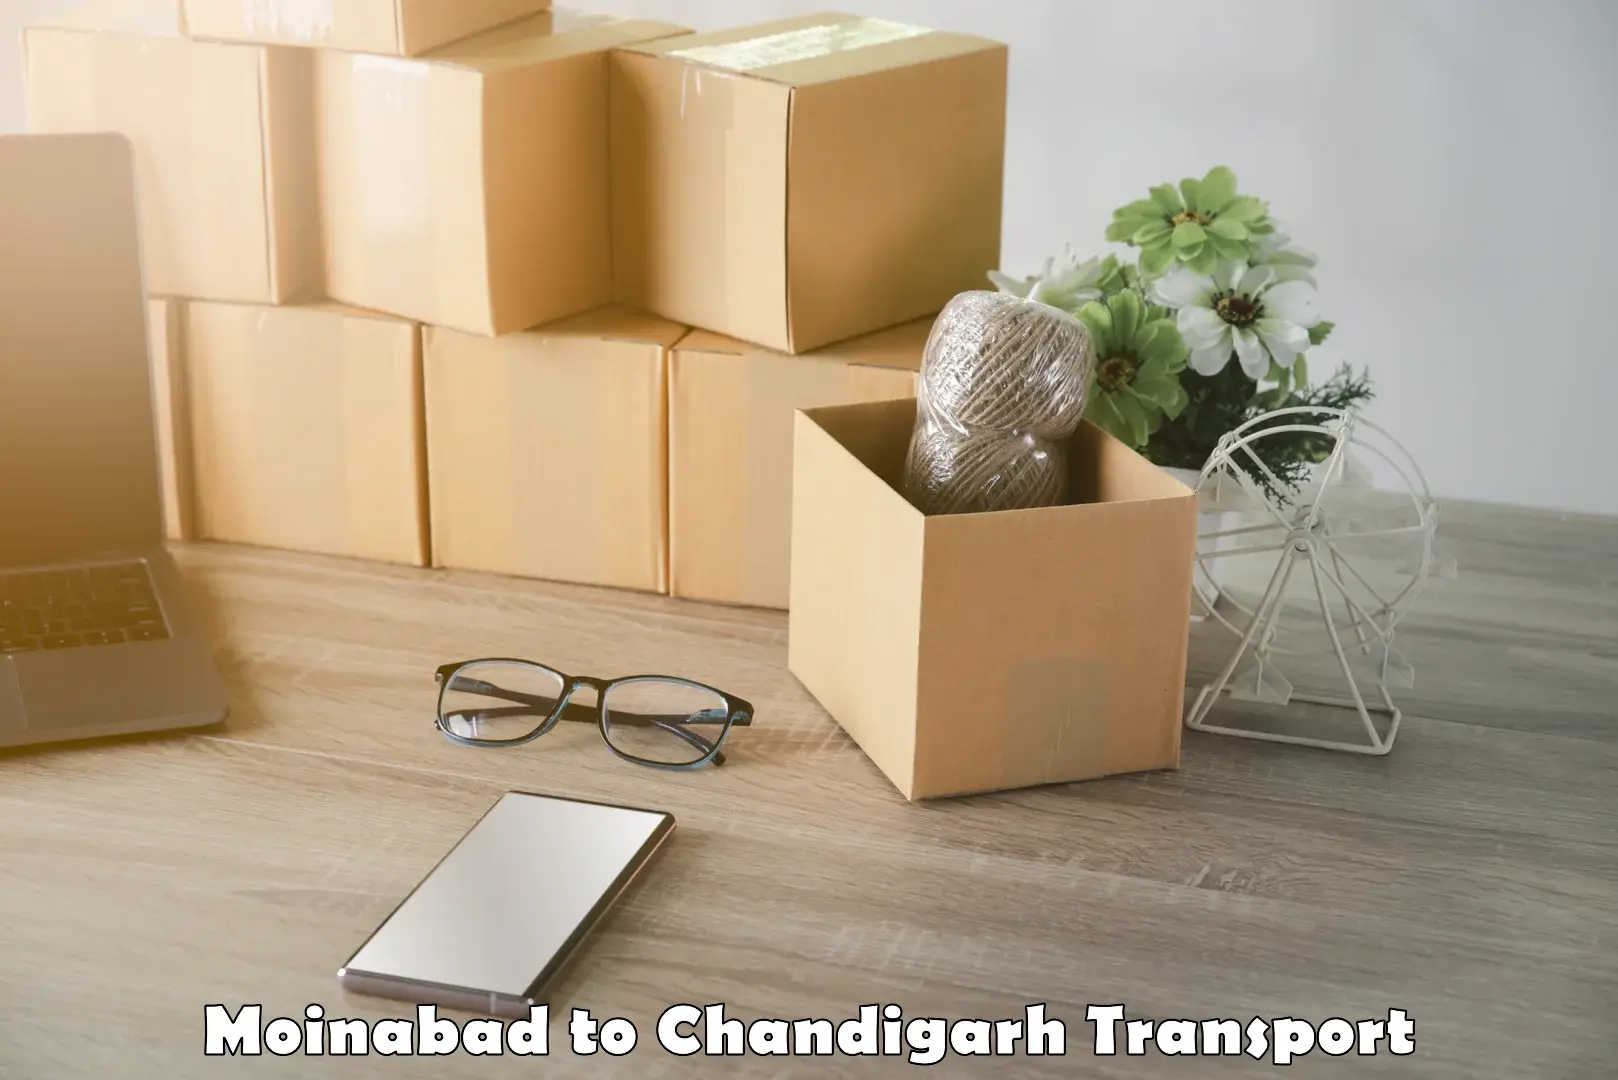 Lorry transport service Moinabad to Chandigarh